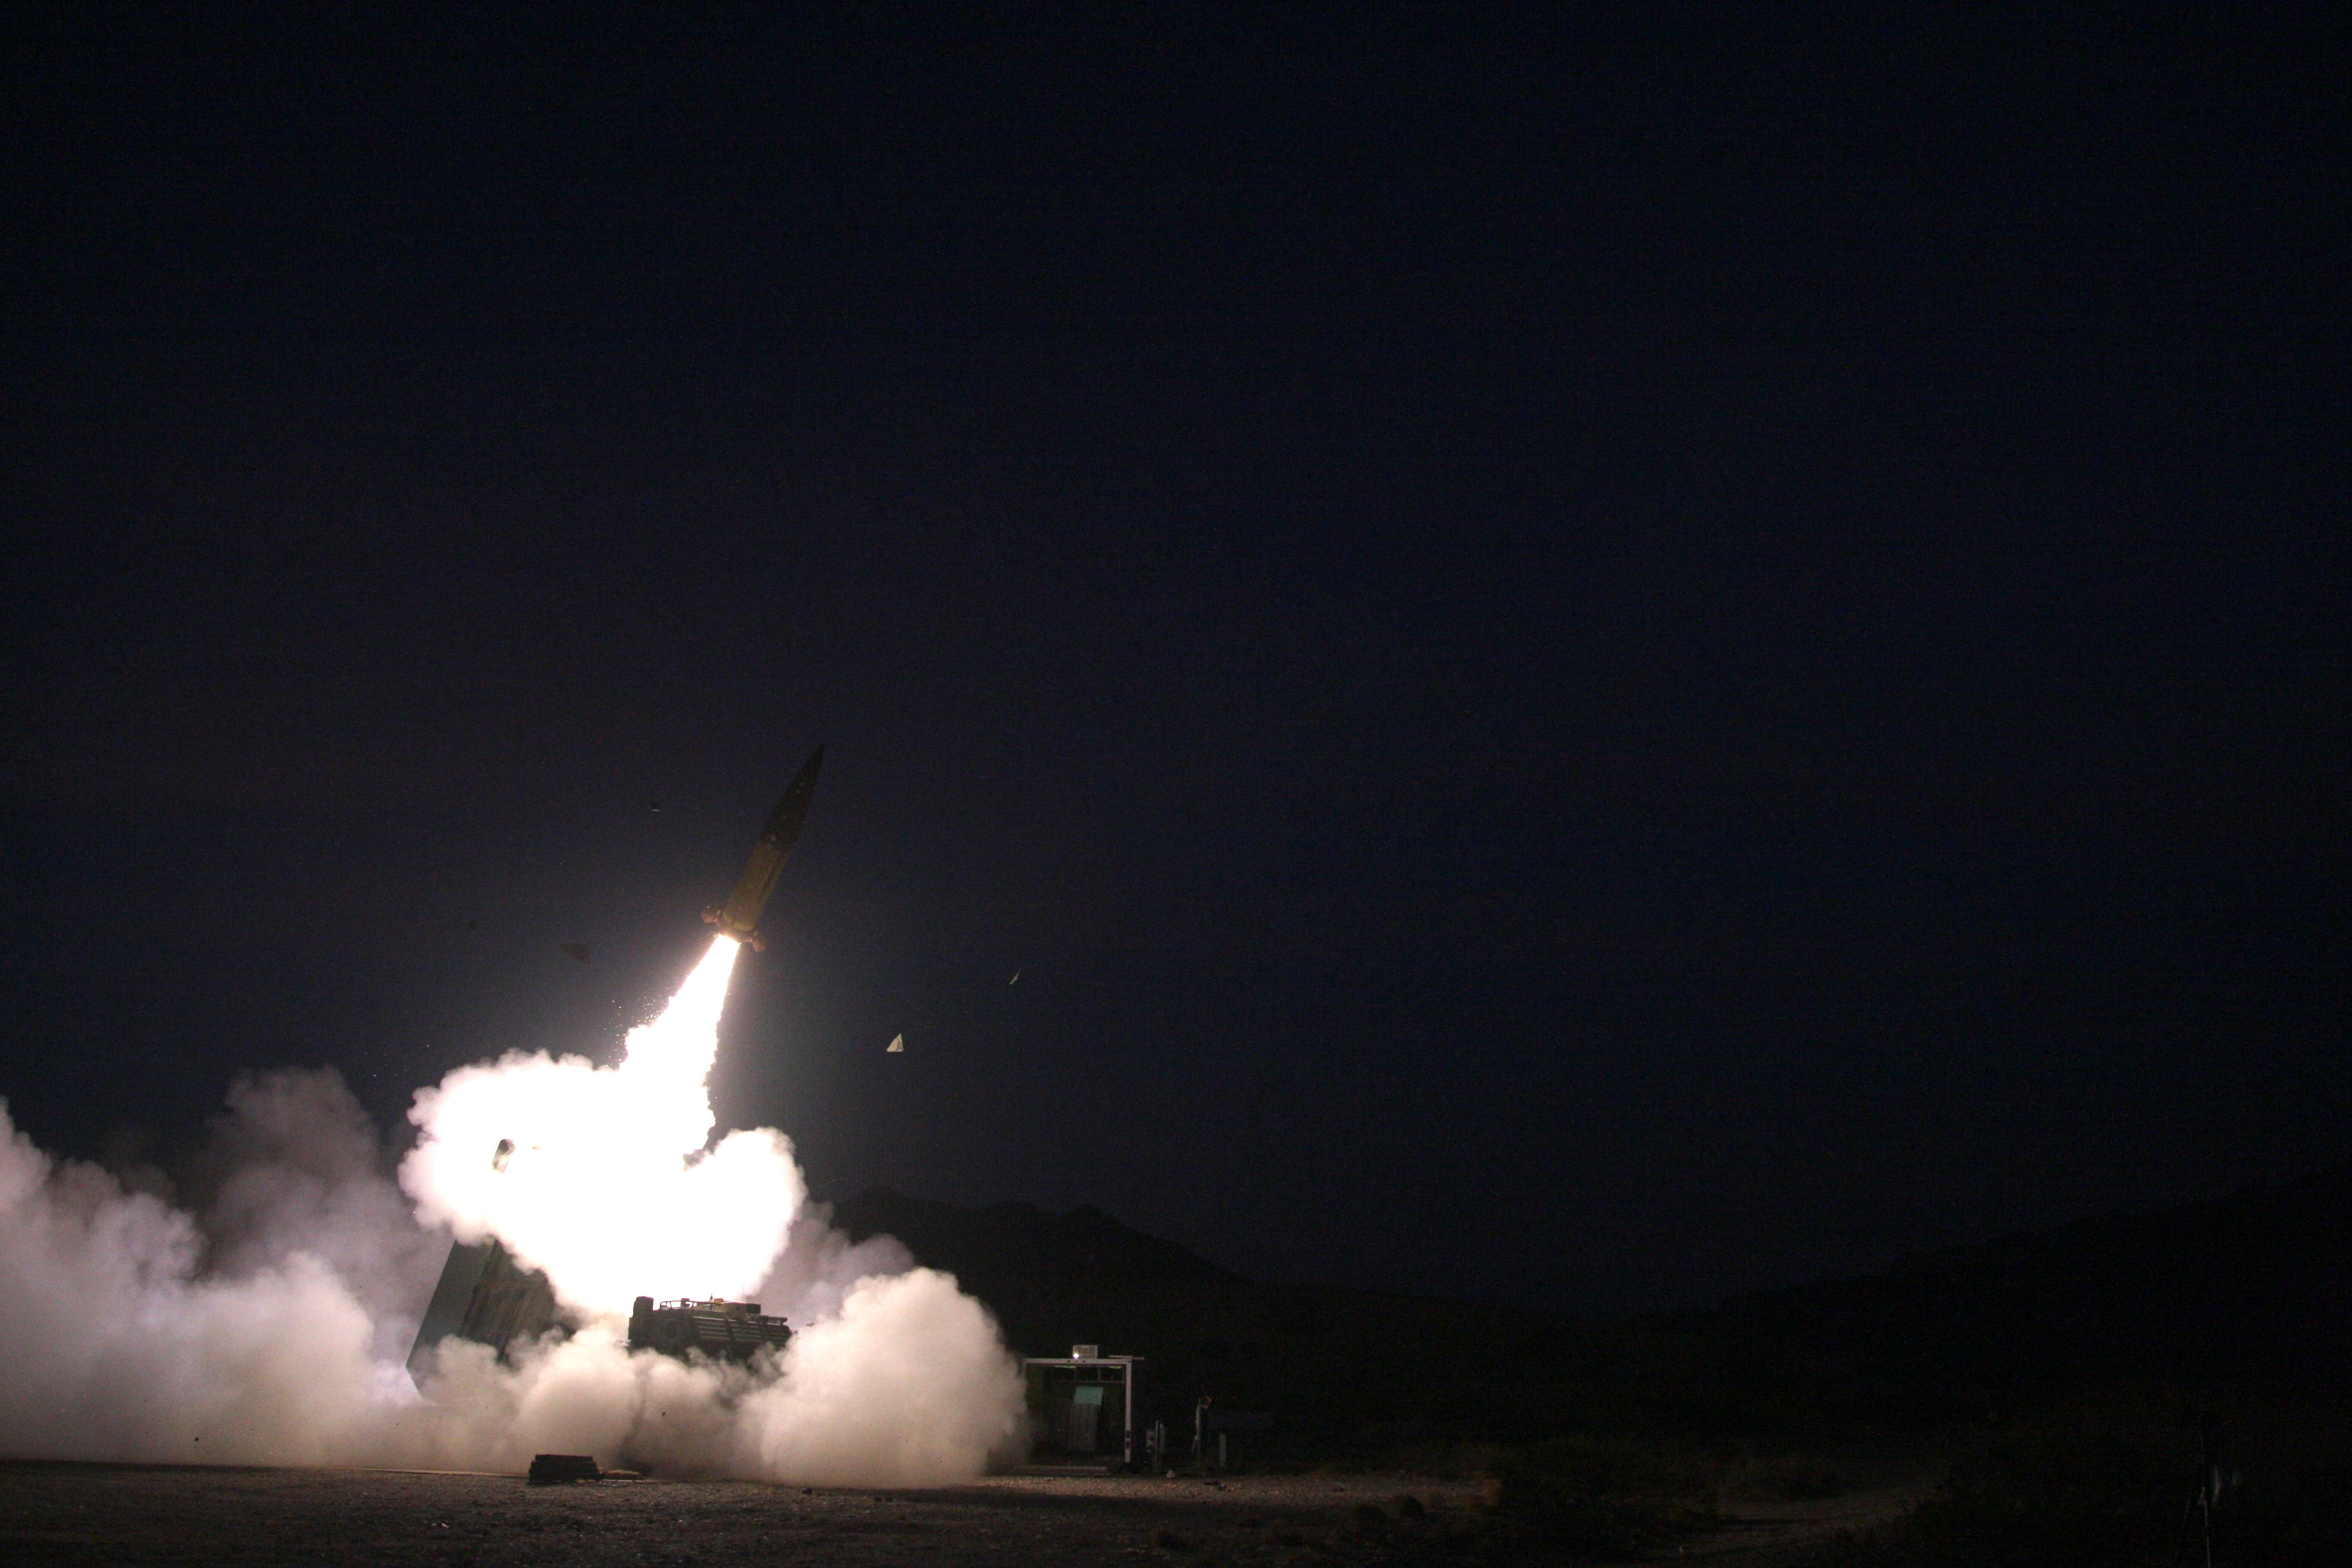 Soldiers came to White Sands Missile Range December 14th, 2021 to conduct live fire testing of old missiles to confirm the older weapons are still reliable and ready for use.